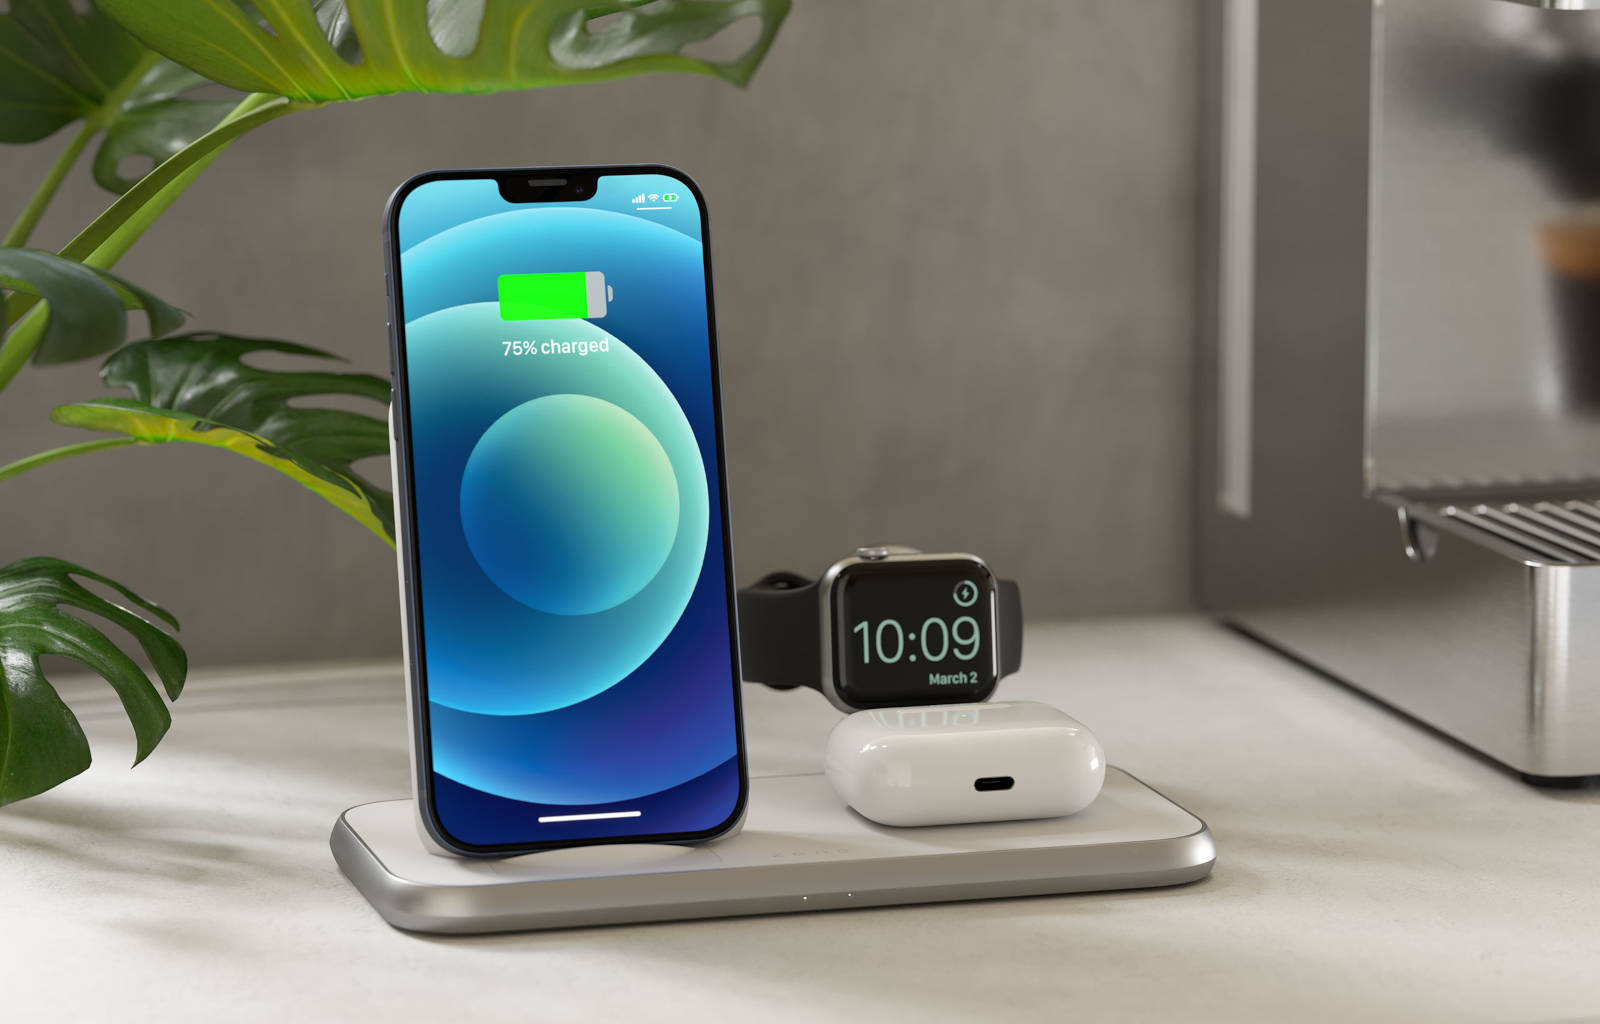 4-in-1 wireless charger with iPhone 12, Apple Watch and AirPods